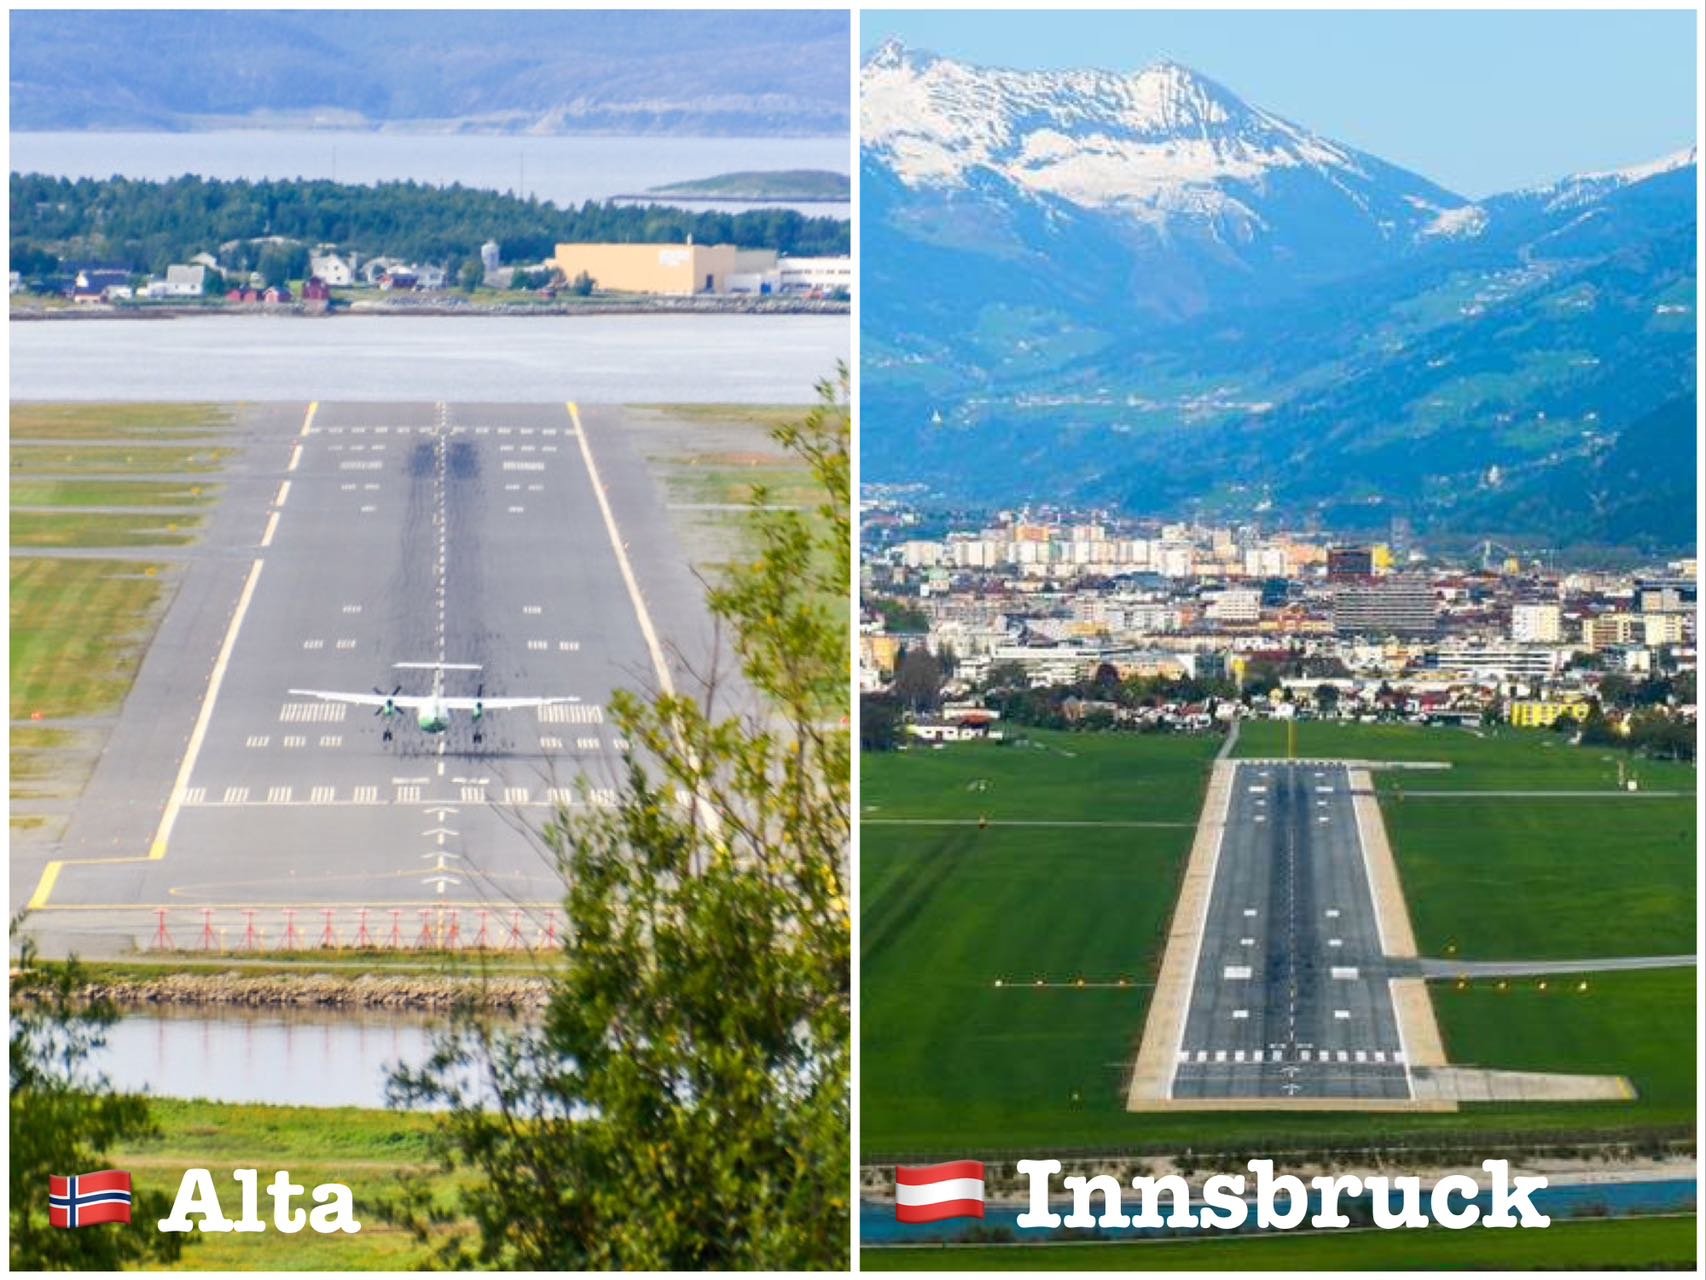 Michael Hundegger: In his career, the airports where it was most difficult to land planes were Alta in Norway and Innsbruck in Austria.